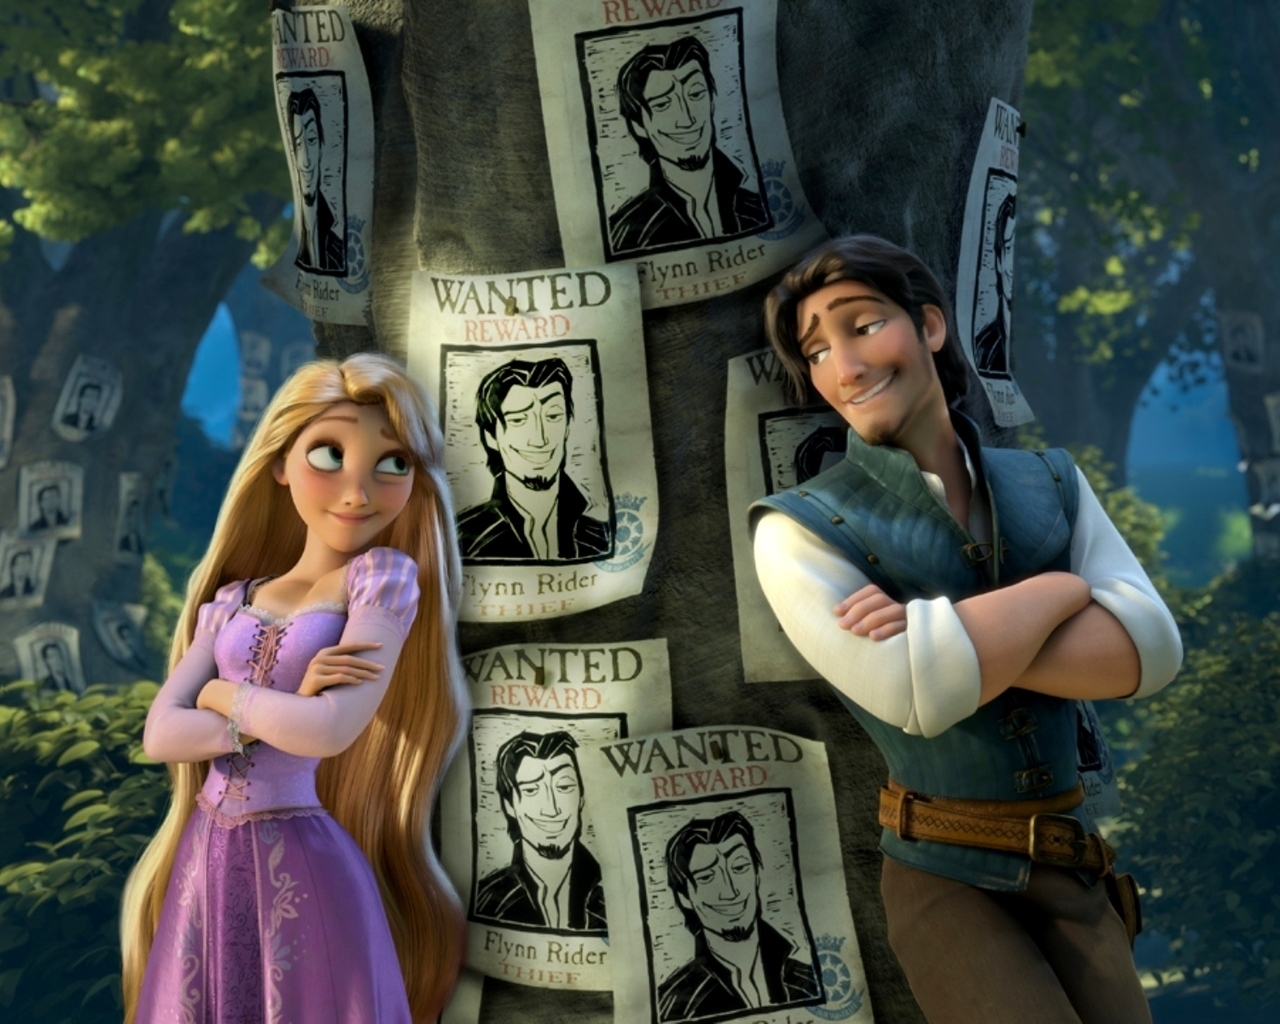 Tangled Musical for 1280 x 1024 resolution